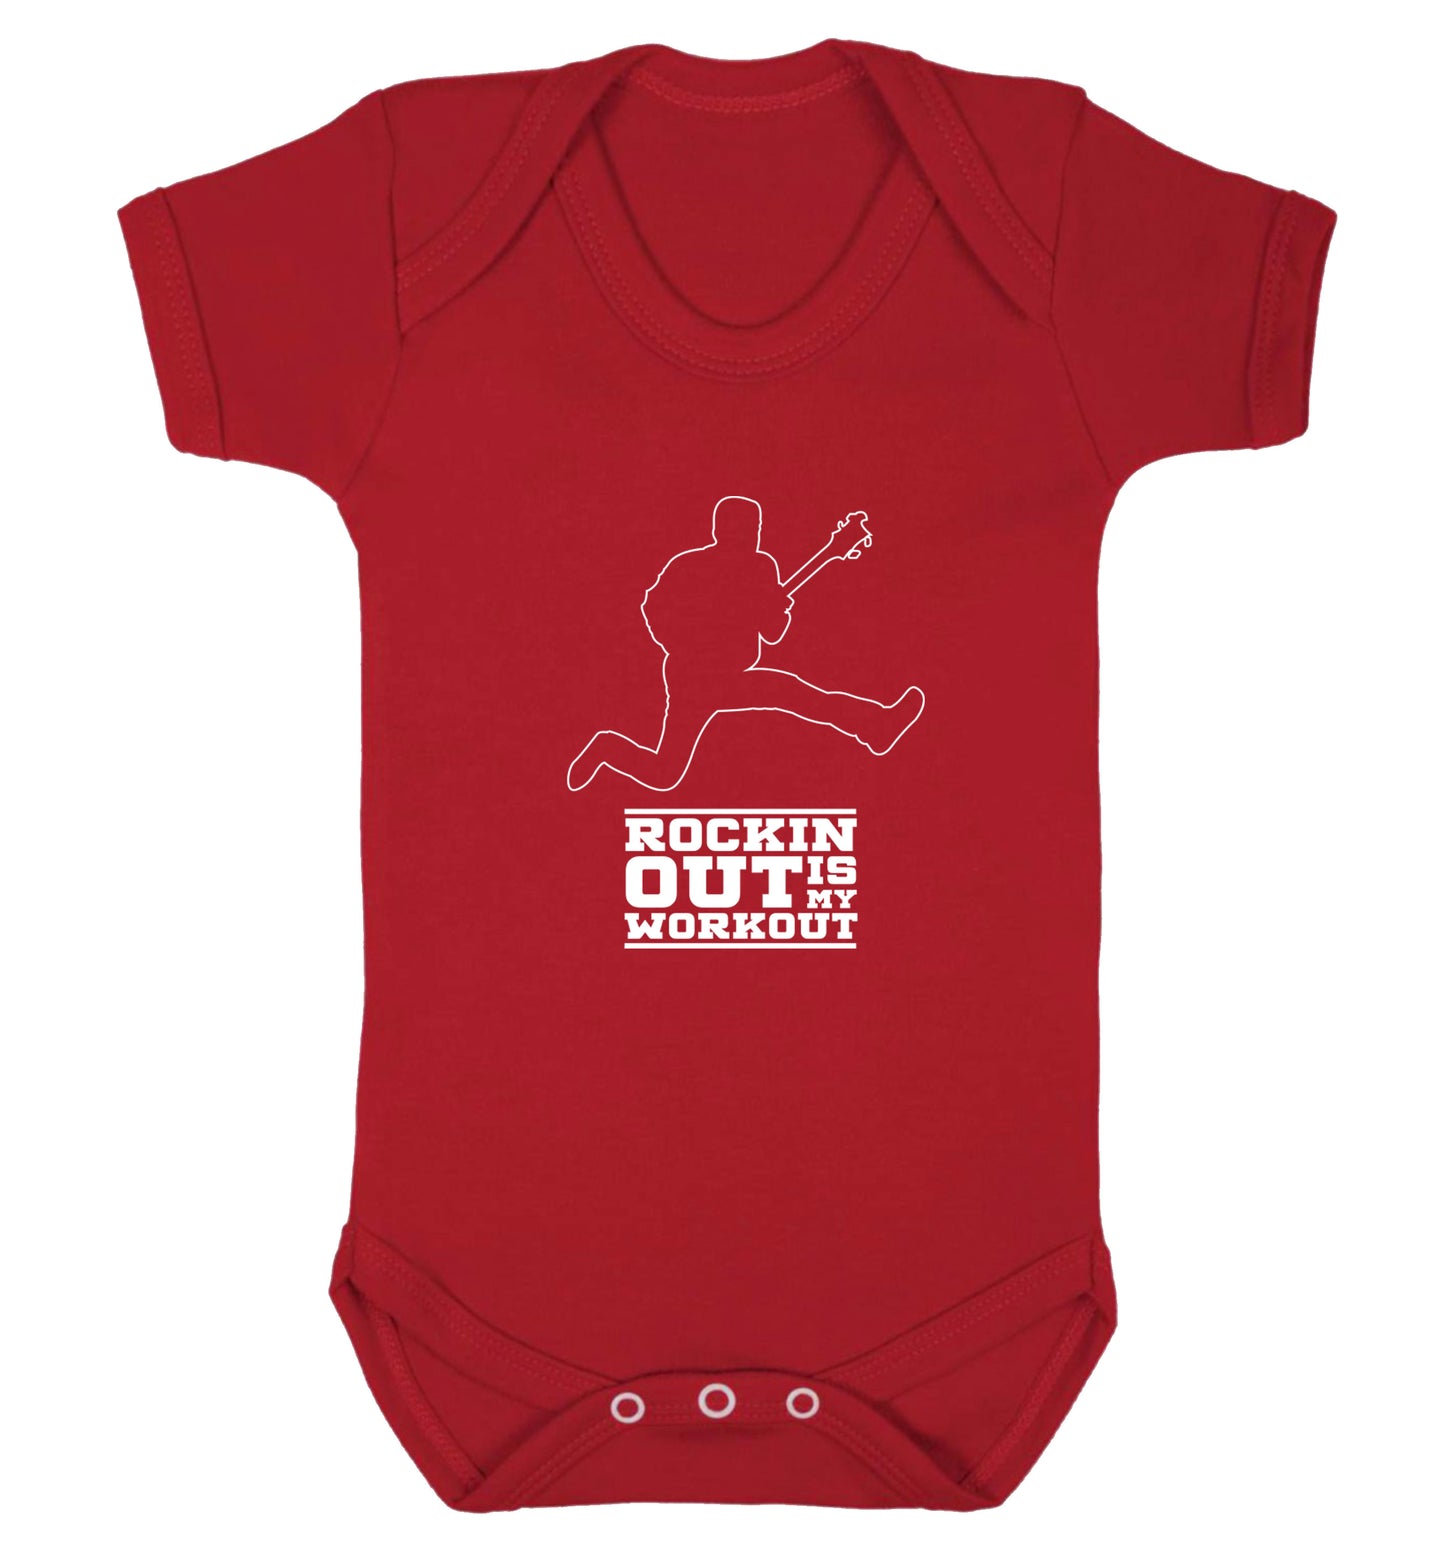 Rockin out is my workout 2 Baby Vest red 18-24 months